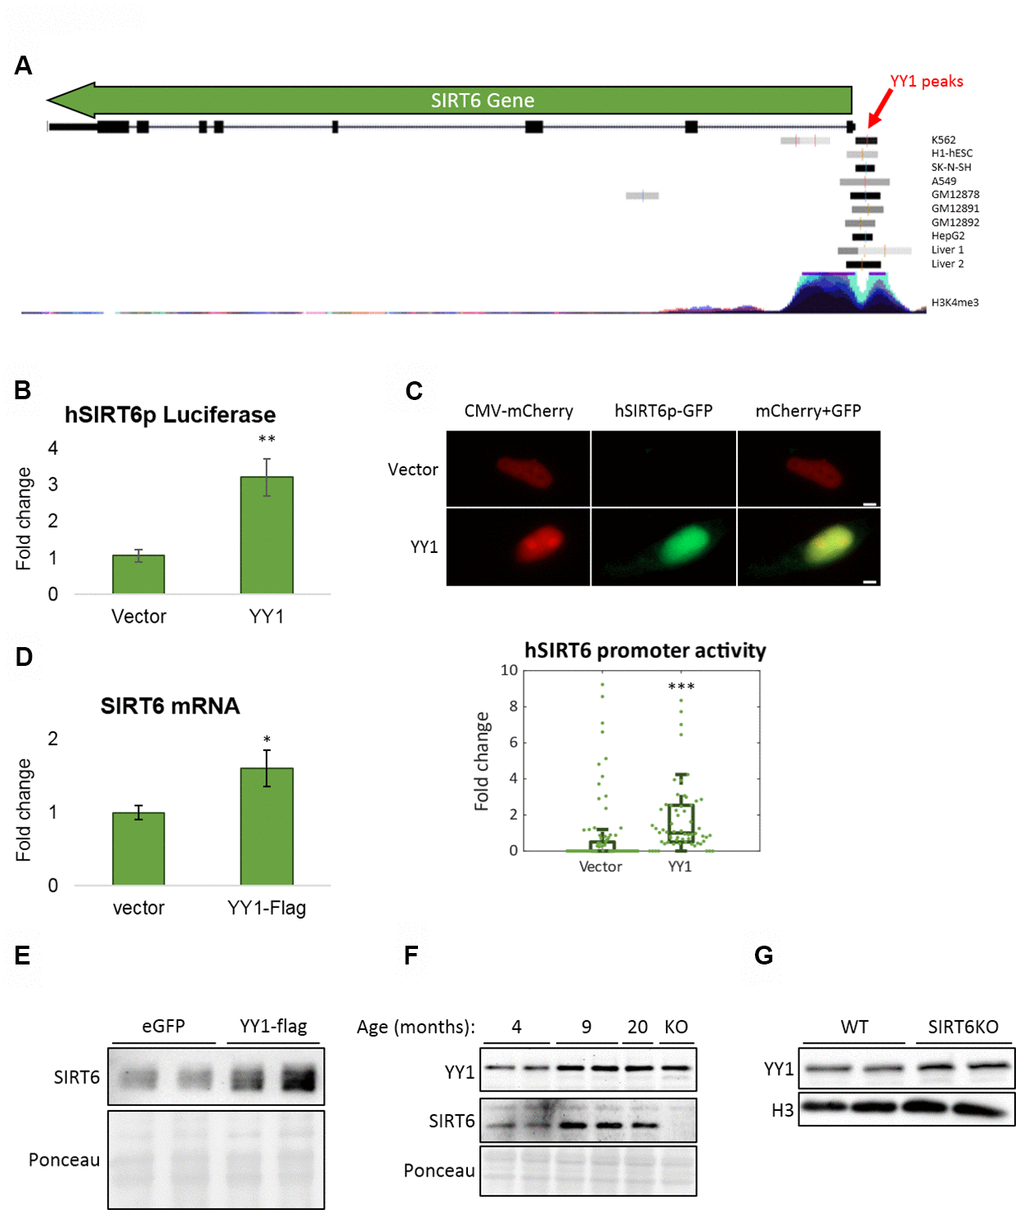 YY1 regulates SIRT6 promoter. (A) YY1 ChIP-seq data in SIRT6 locus. SIRT6 locus is marked with a green arrow; YY1 peaks are marked in black or grey shades; tested cell lines are marked on the right side of each YY1 peak. (B) hSIRT6p-Firefly Luciferase assay with an empty vector or YY1-Flag overexpression vector. Chosen promoter region – 1000 bases before TSS and 2000 bases after (including the first 2 exons and the intron in between). (C) Human SIRT6 promoter activation tested using a hSIRT6p-GFP-CMV-mCherry vector, co-transfected with either empty or YY1-overexpressing vector. Upper panel – representative cell images; lower panel – an unbiased quantification of GFP/mCherry ratio per cell. Box plots represent quartile range, whiskers represent 10% and 90% of datapoints, horizontal line represents median. (D) SIRT6 mRNA levels in cells transfected with either an empty or YY1-flag overexpression vector. (E) SIRT6 protein levels in cells transfected with either eGFP- or YY1-overexpressing vectors. (F) Brains of WT mice at different ages and SIRT6-KO mouse (serves as a control for SIRT6 specificity). (G) Protein blots of WT or SIRT6-KO SH-SY5Y cells. * - p-value 